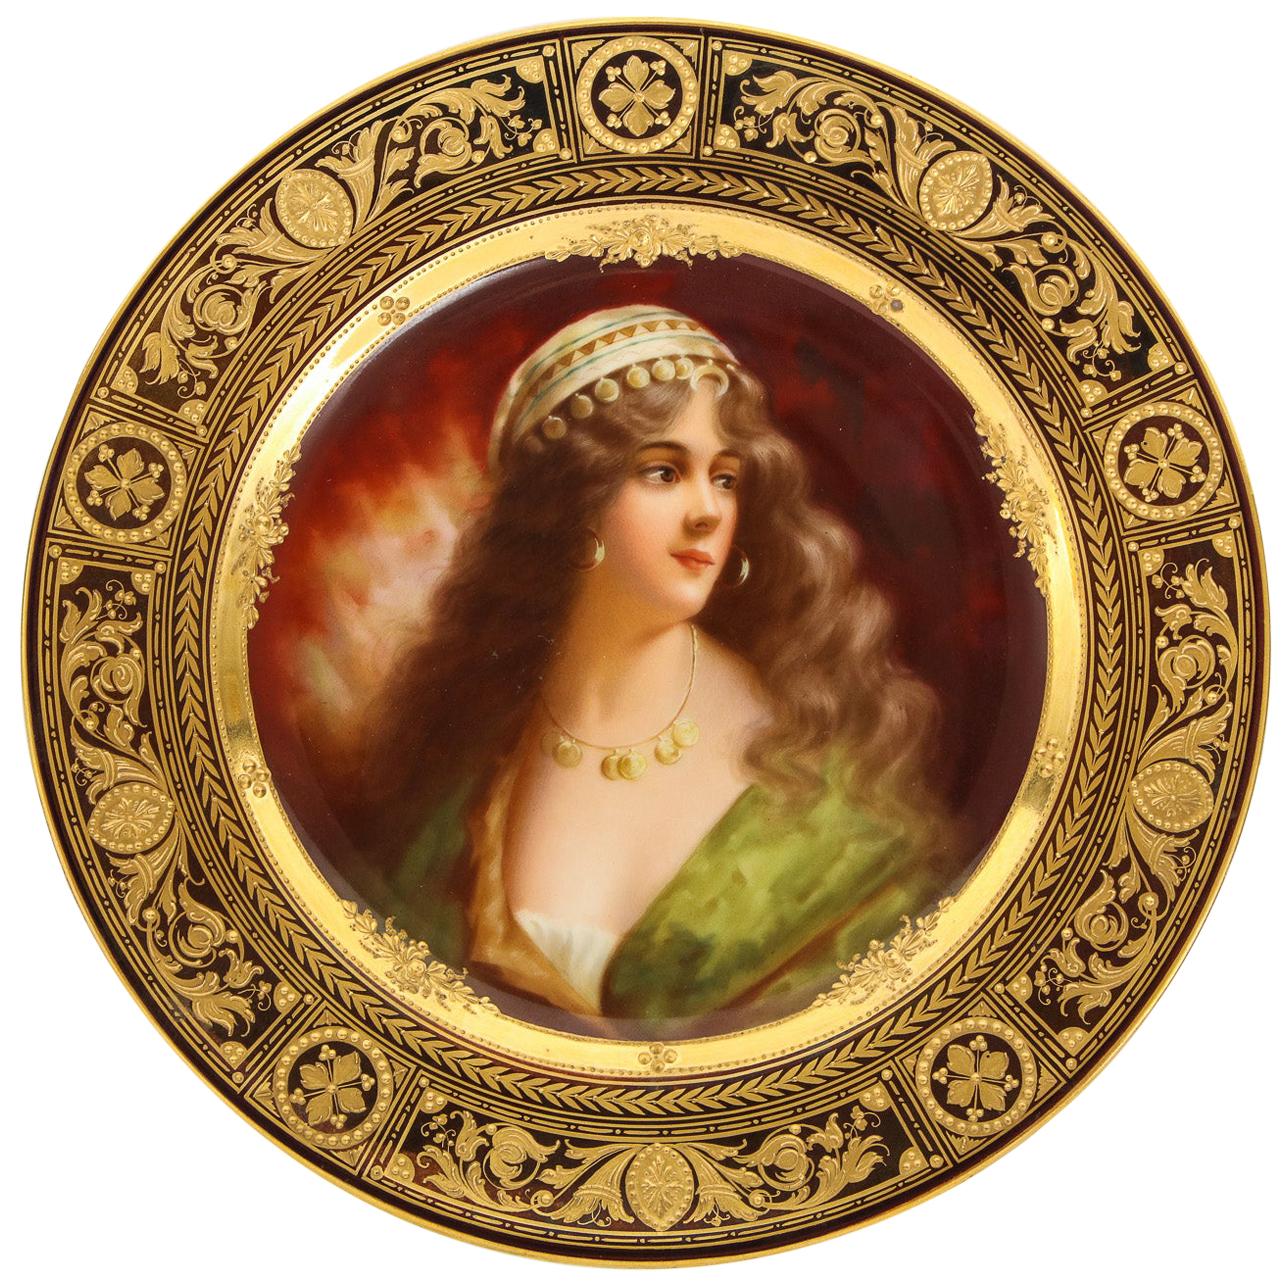 Rare and Exceptional Royal Vienna Porcelain Plate of "Yessida" by Wagner